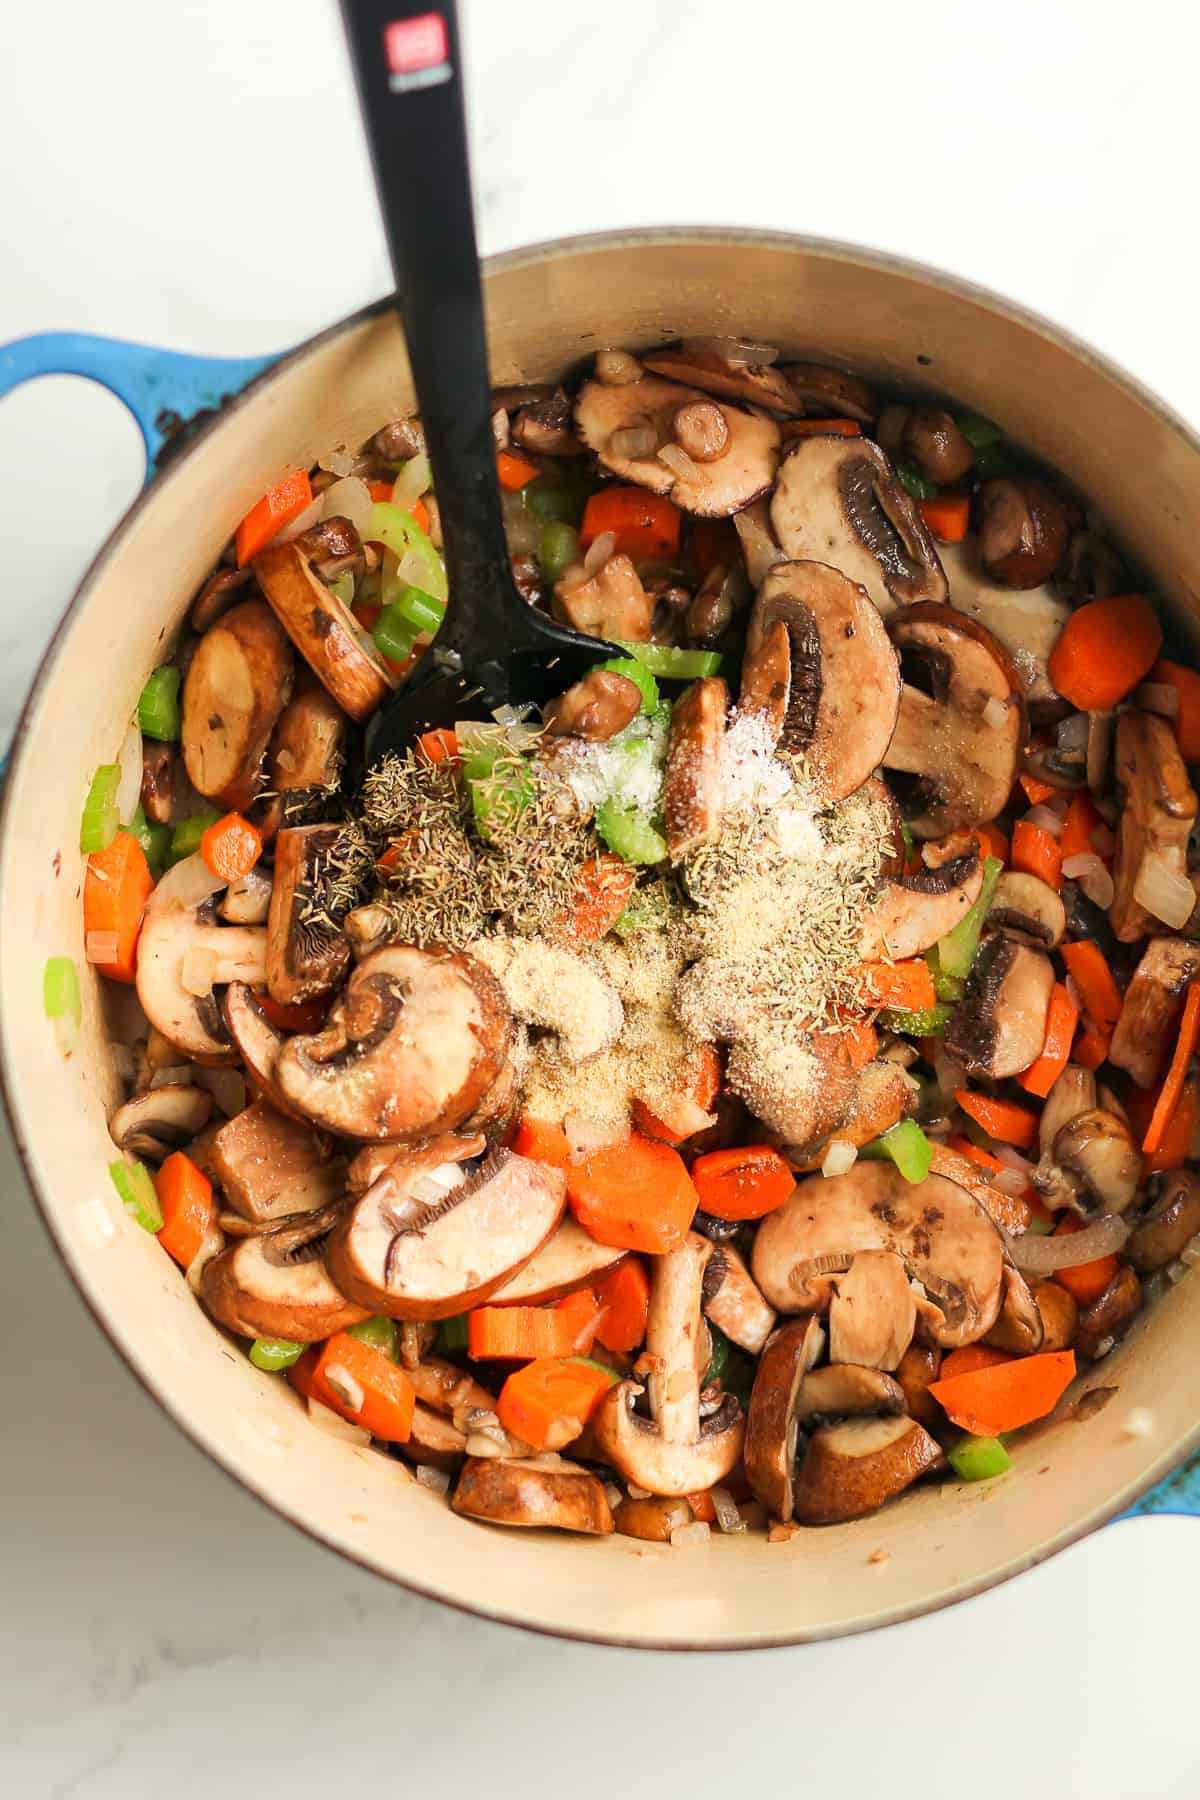 A stock pot of cooked veggies with seasonings on top.